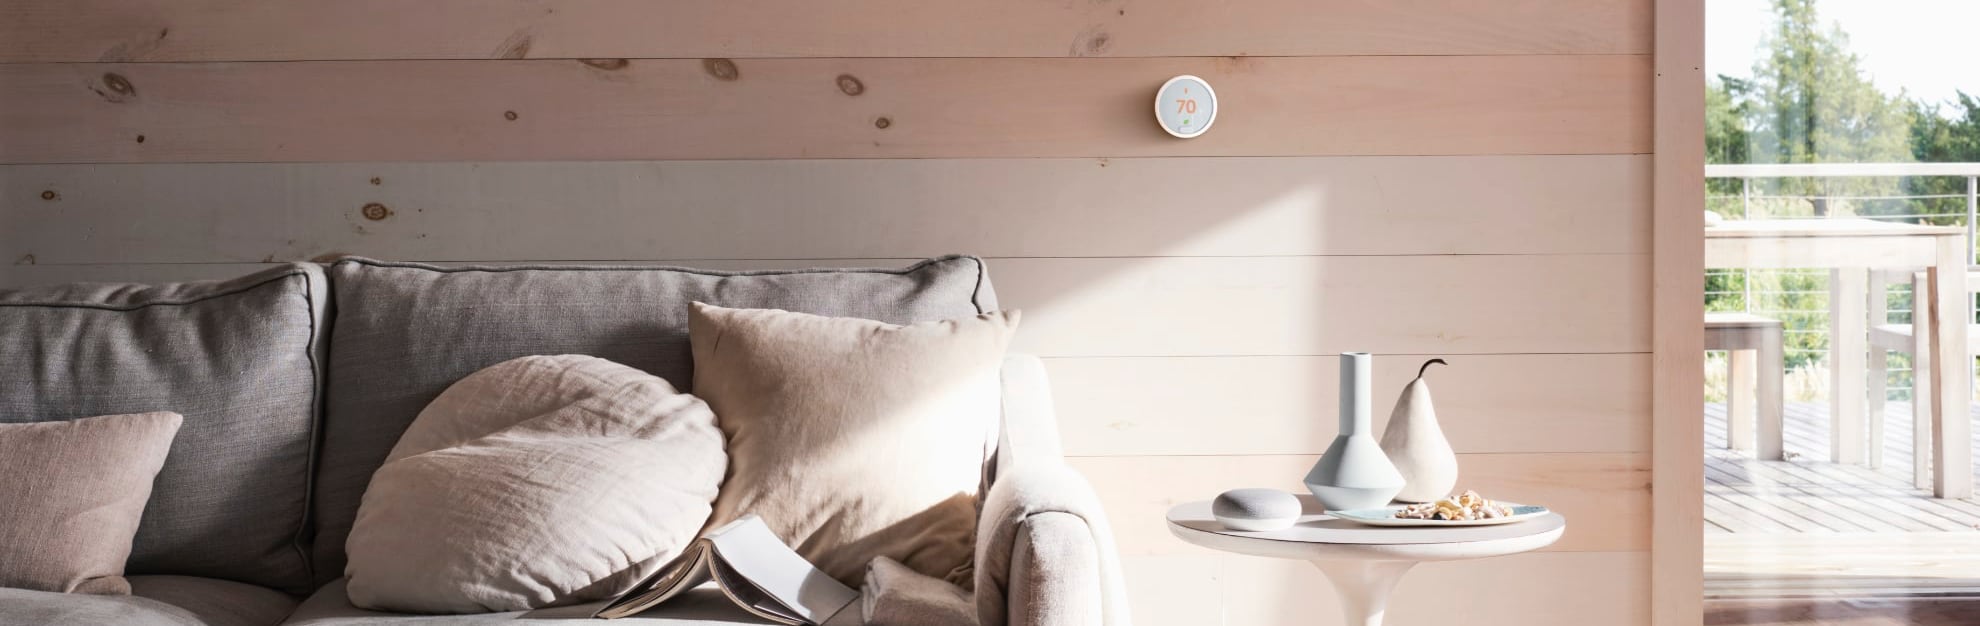 Vivint Home Automation in Indianapolis